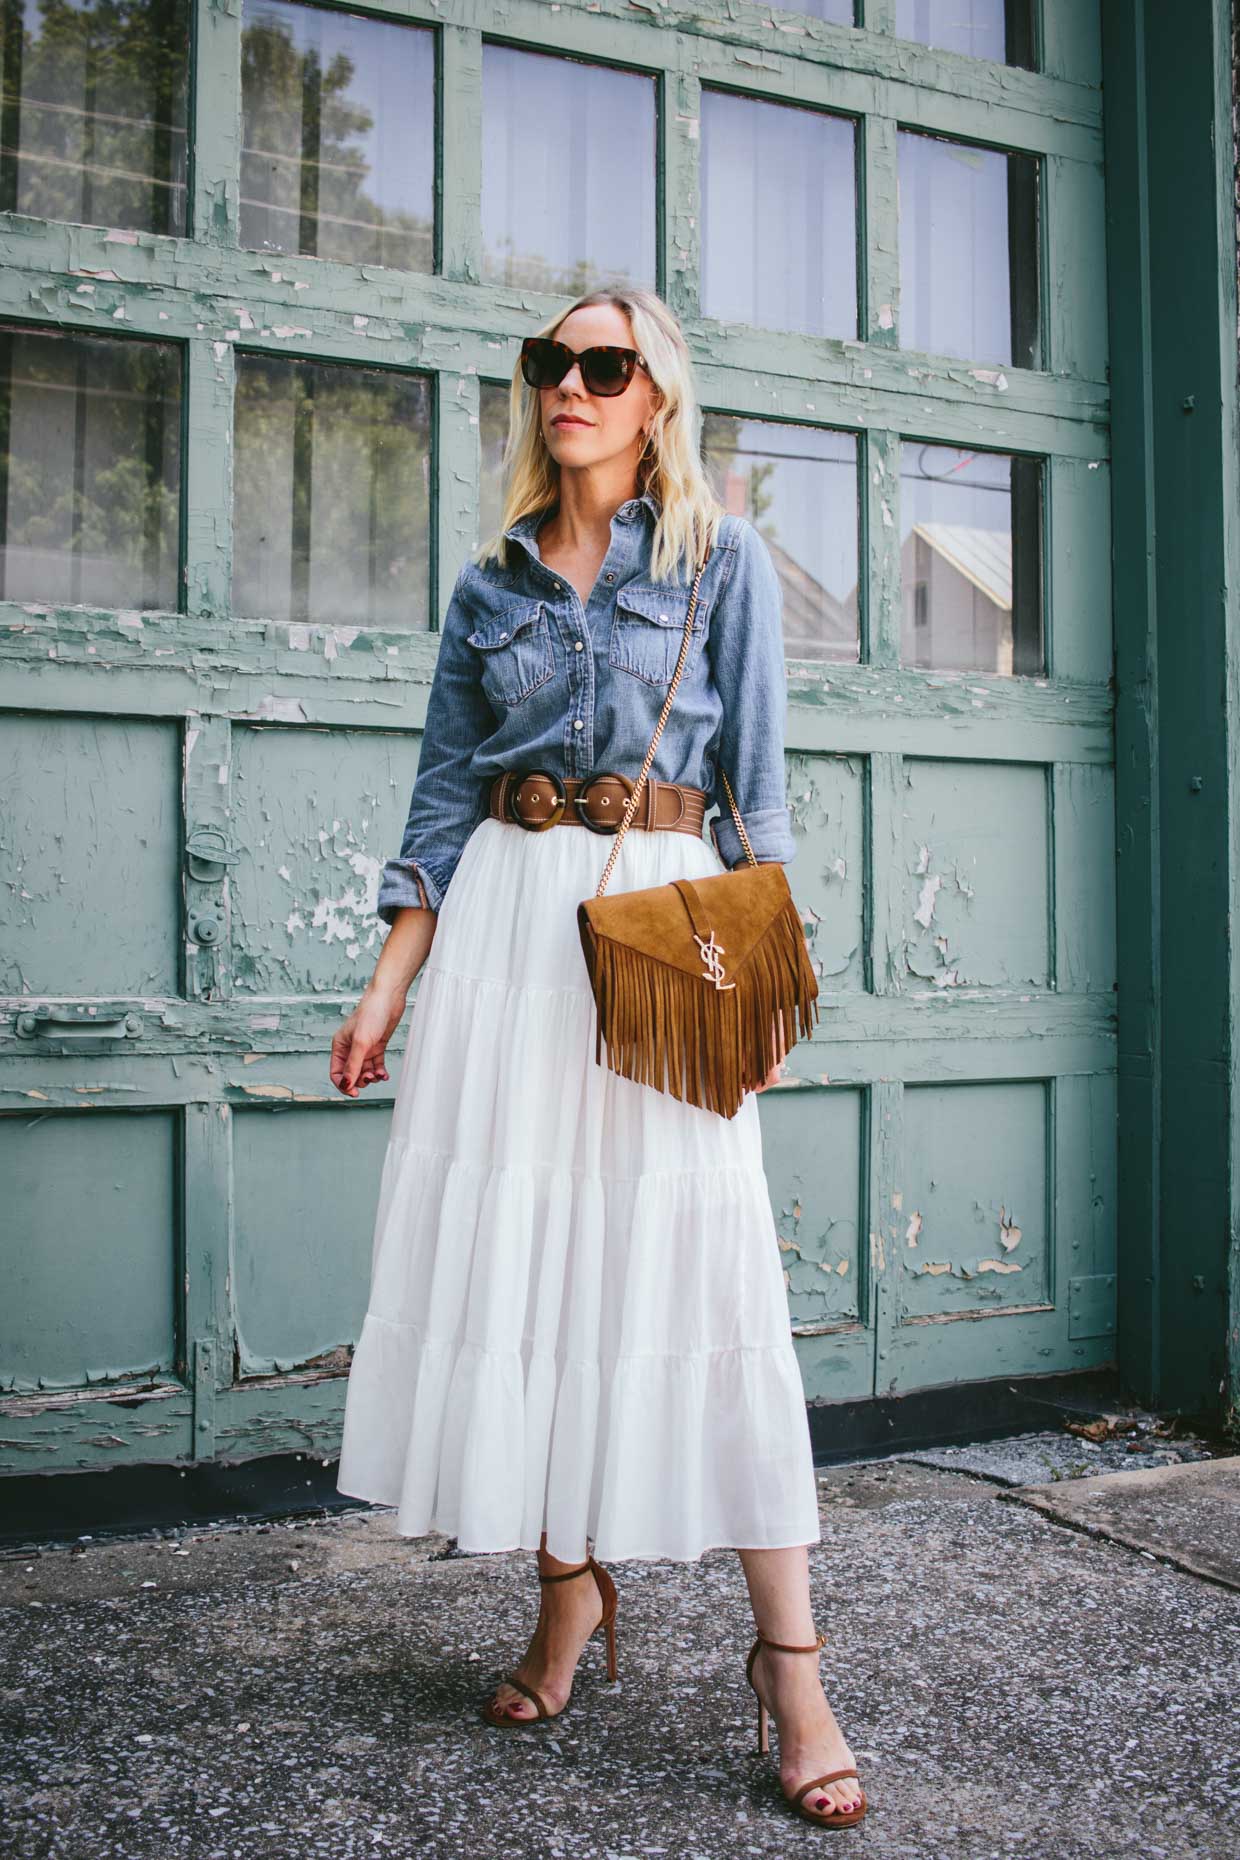 denim shirt with skirt outfit